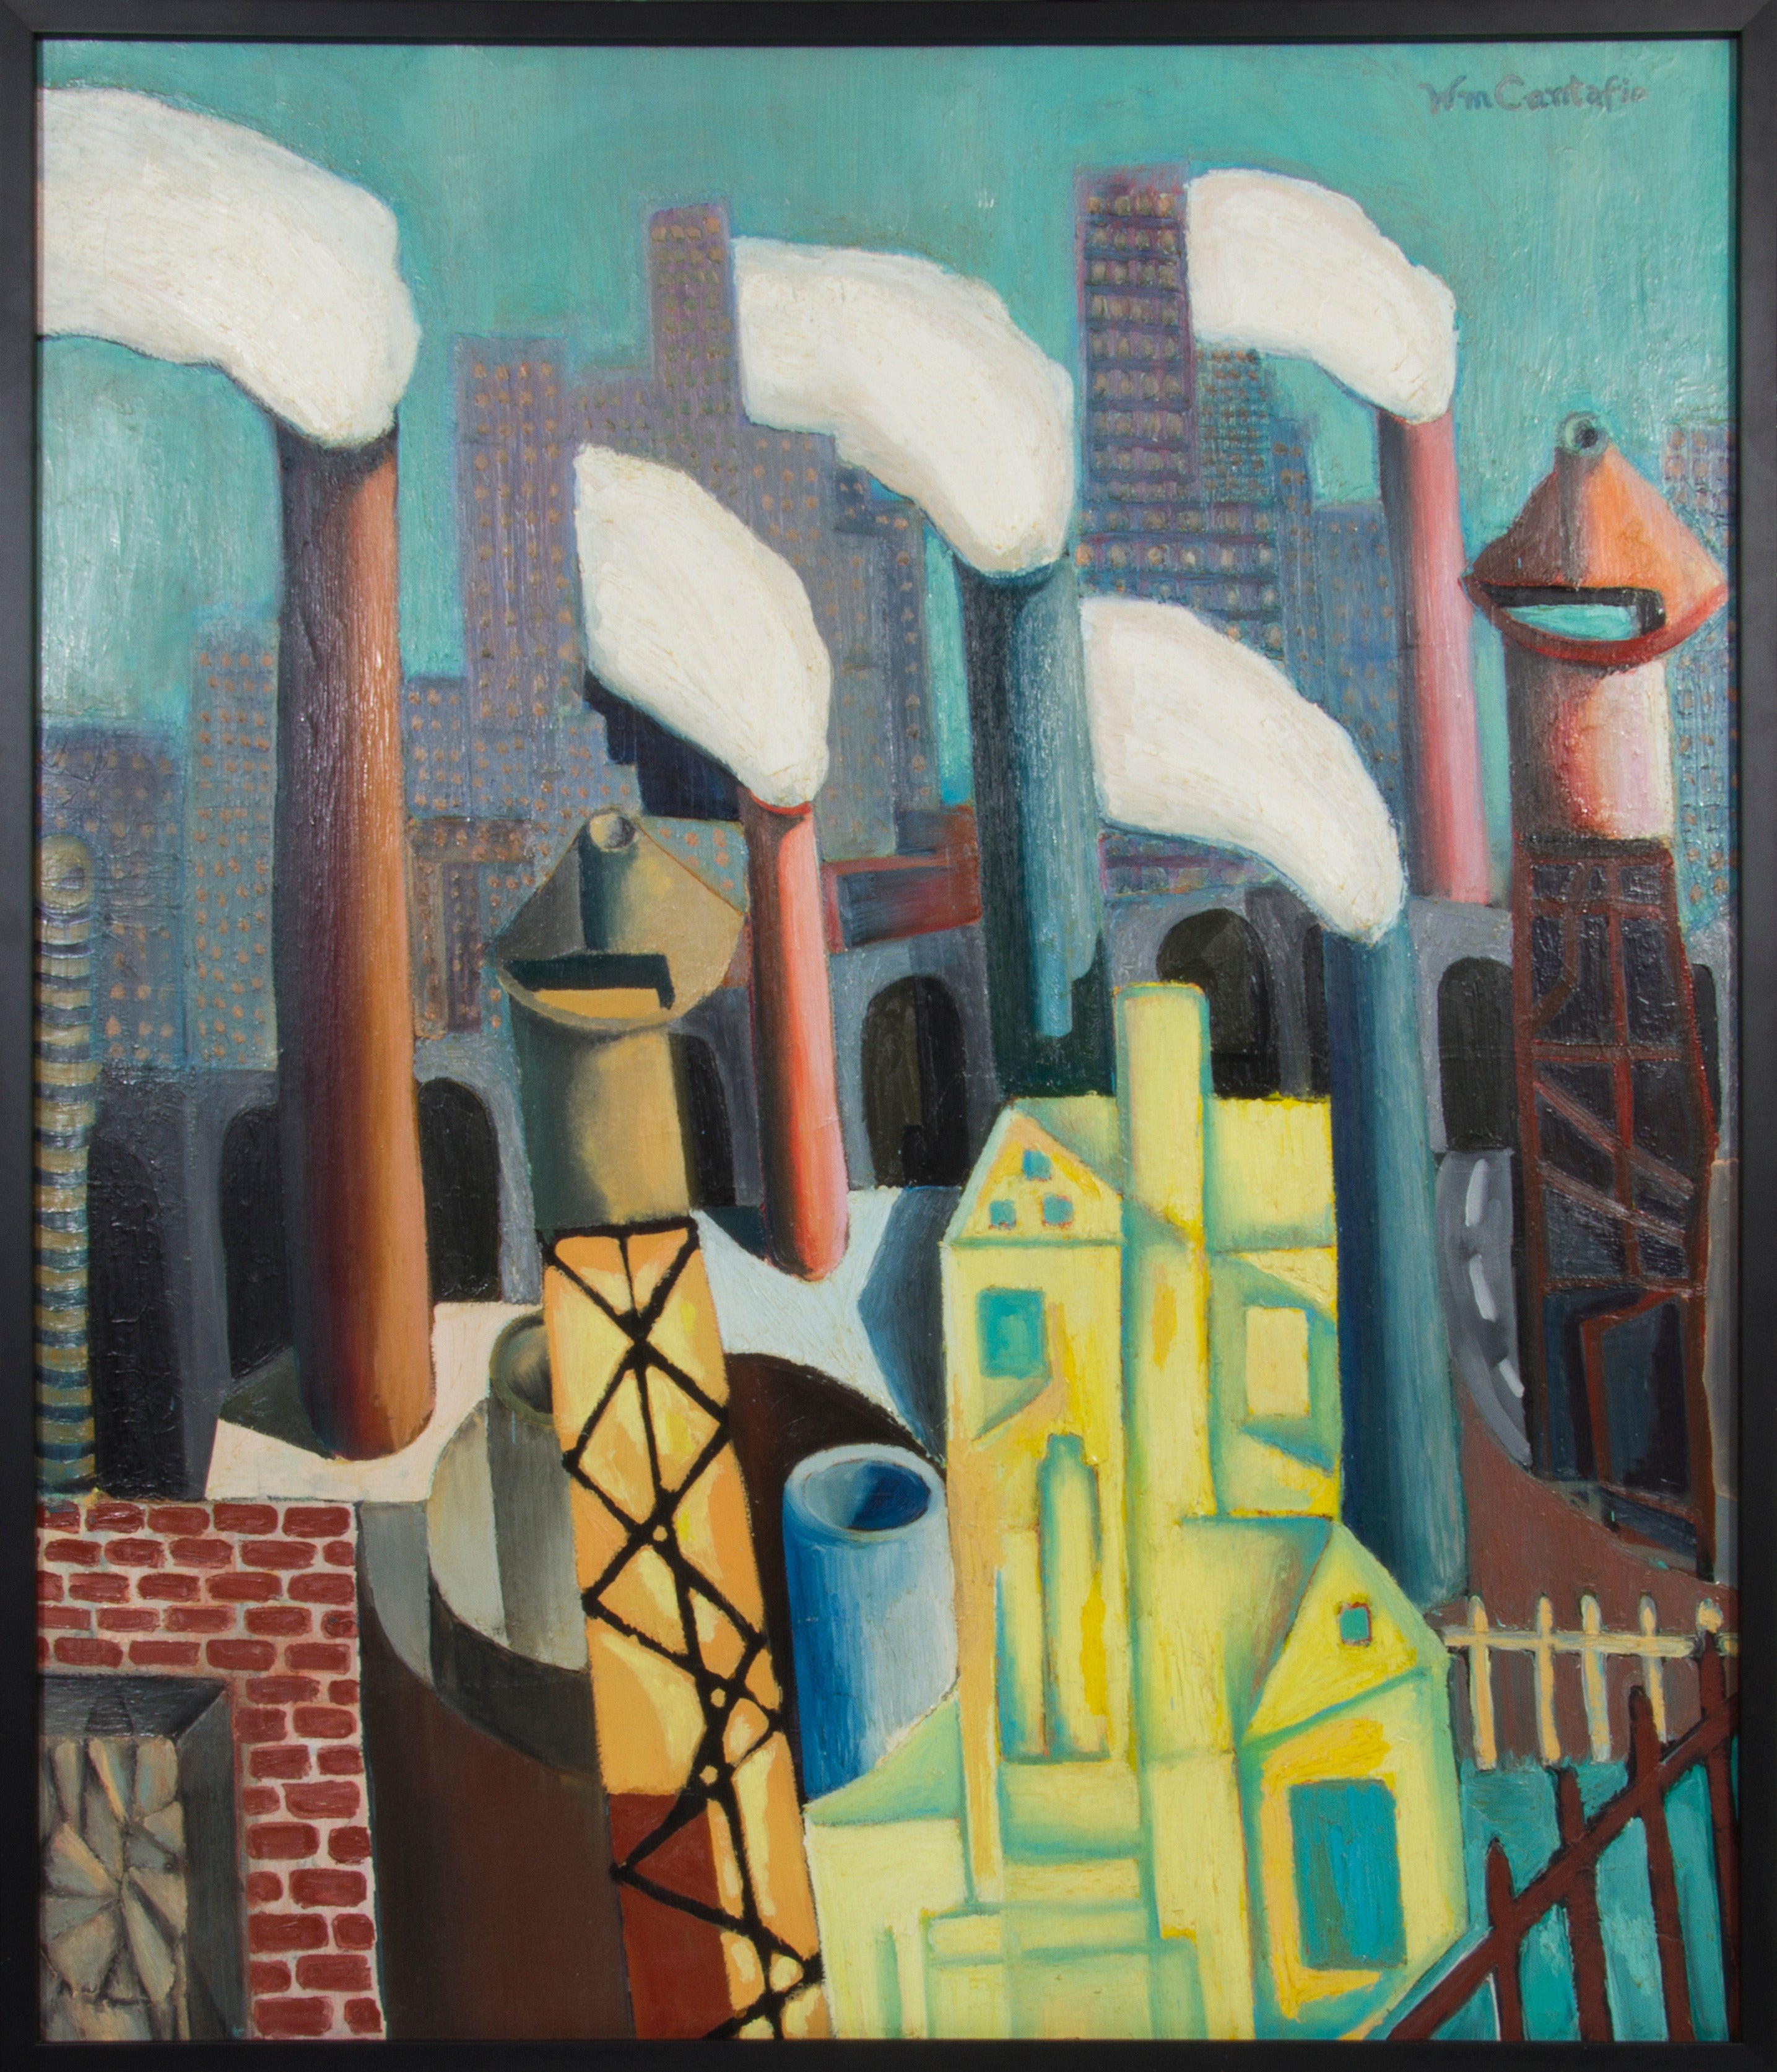 William Cantafio Oil on Canvas "Smokestacks" Painting For Sale